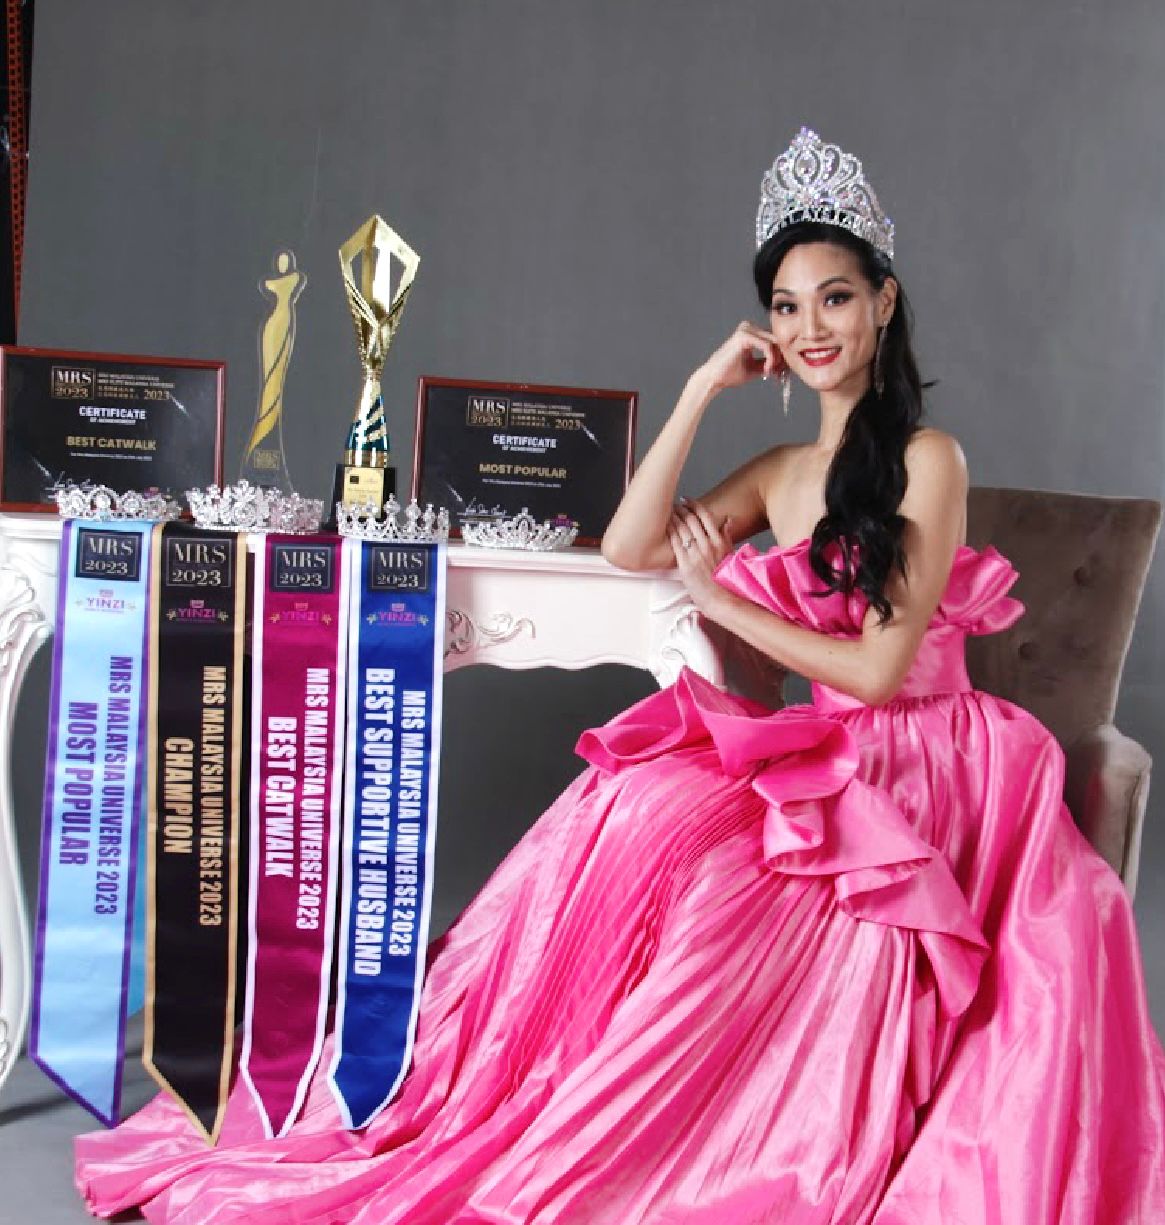 Liew says that Malaysia has a huge potential to host more pageants. – Pic courtesy of Foong Chee